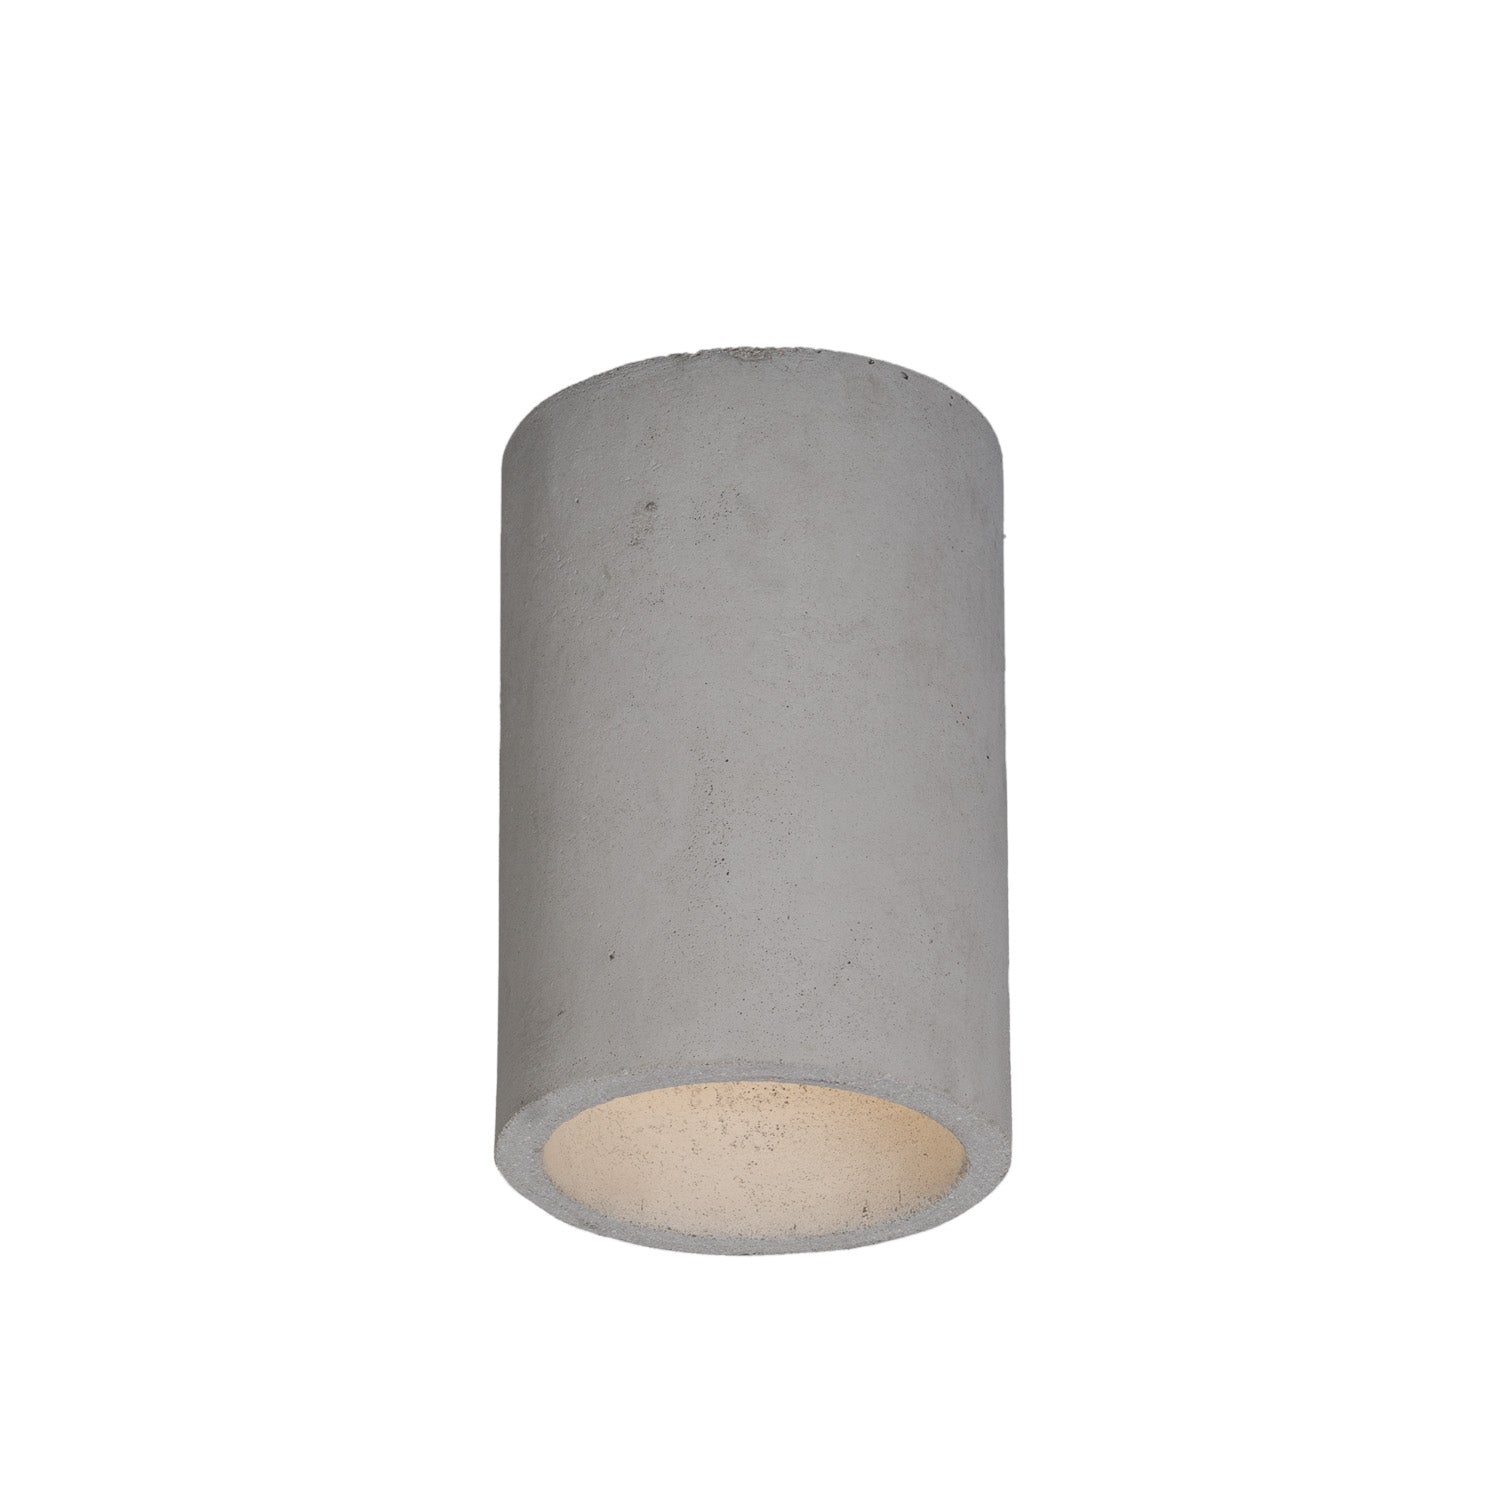 The pound ceiling is a unique lighting that will fit into every loft and industrial interior. Made entirely of concrete, it presents a raw form that has practical and decorative functions. The small height means that no room will be overwhelmed by its presence. It will create a cozy glow both after placing it in the bathroom just in front of the mirror, as well as above the kitchen island.